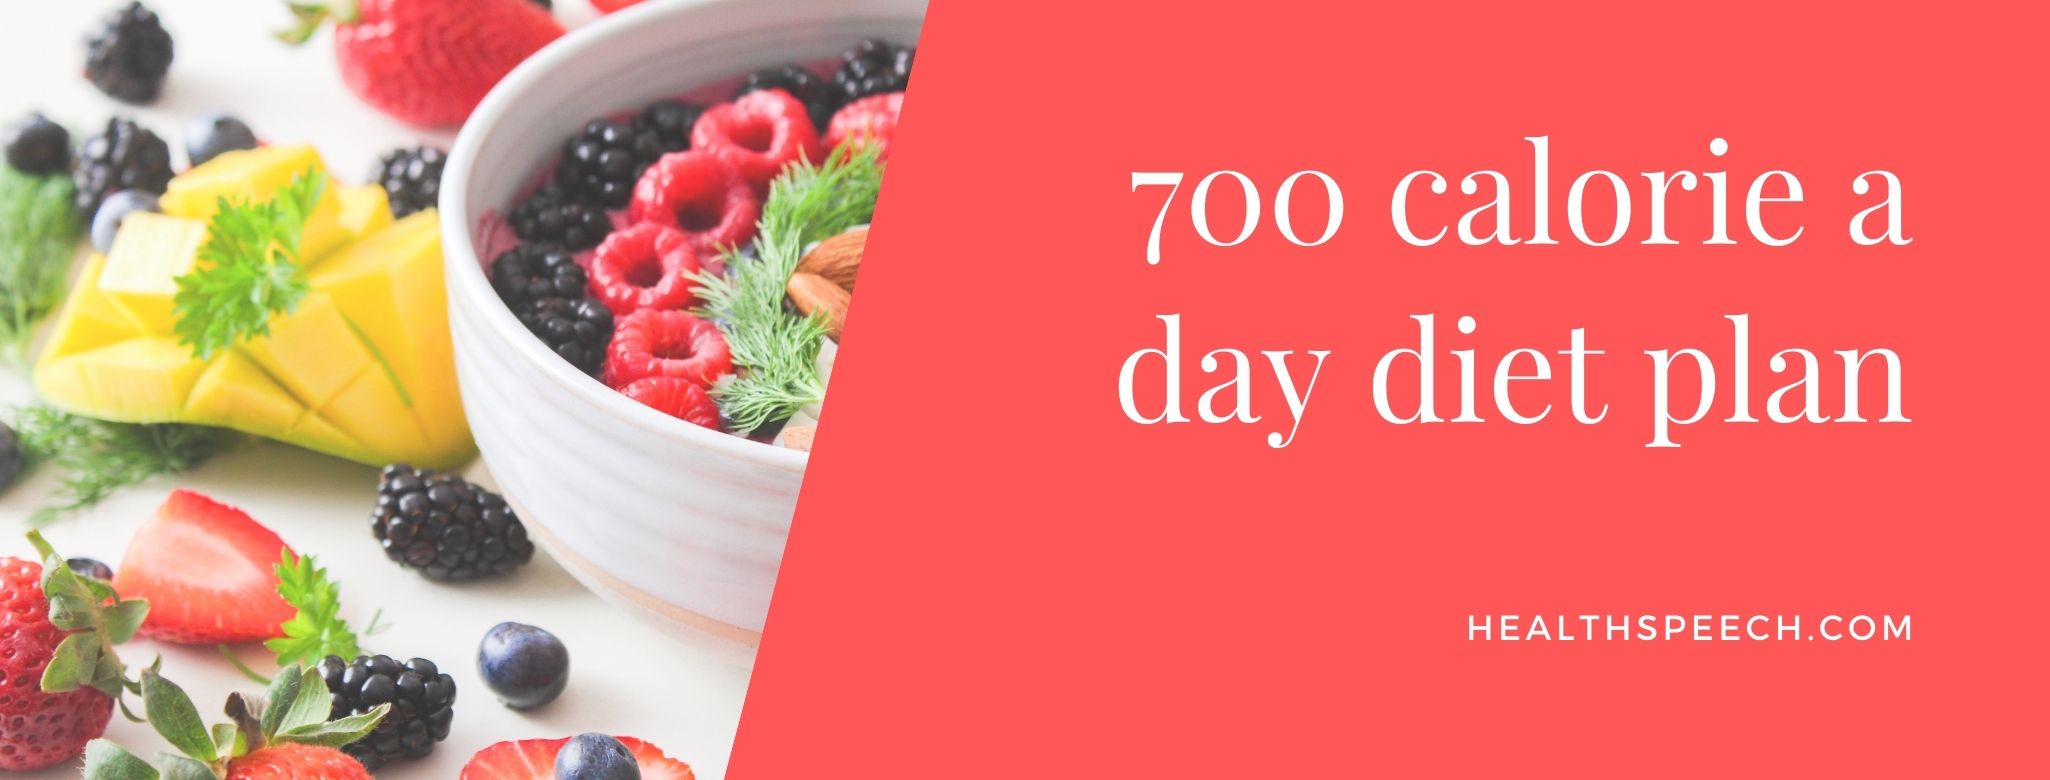 Meal plan for 700 calories a day - Super diet plan